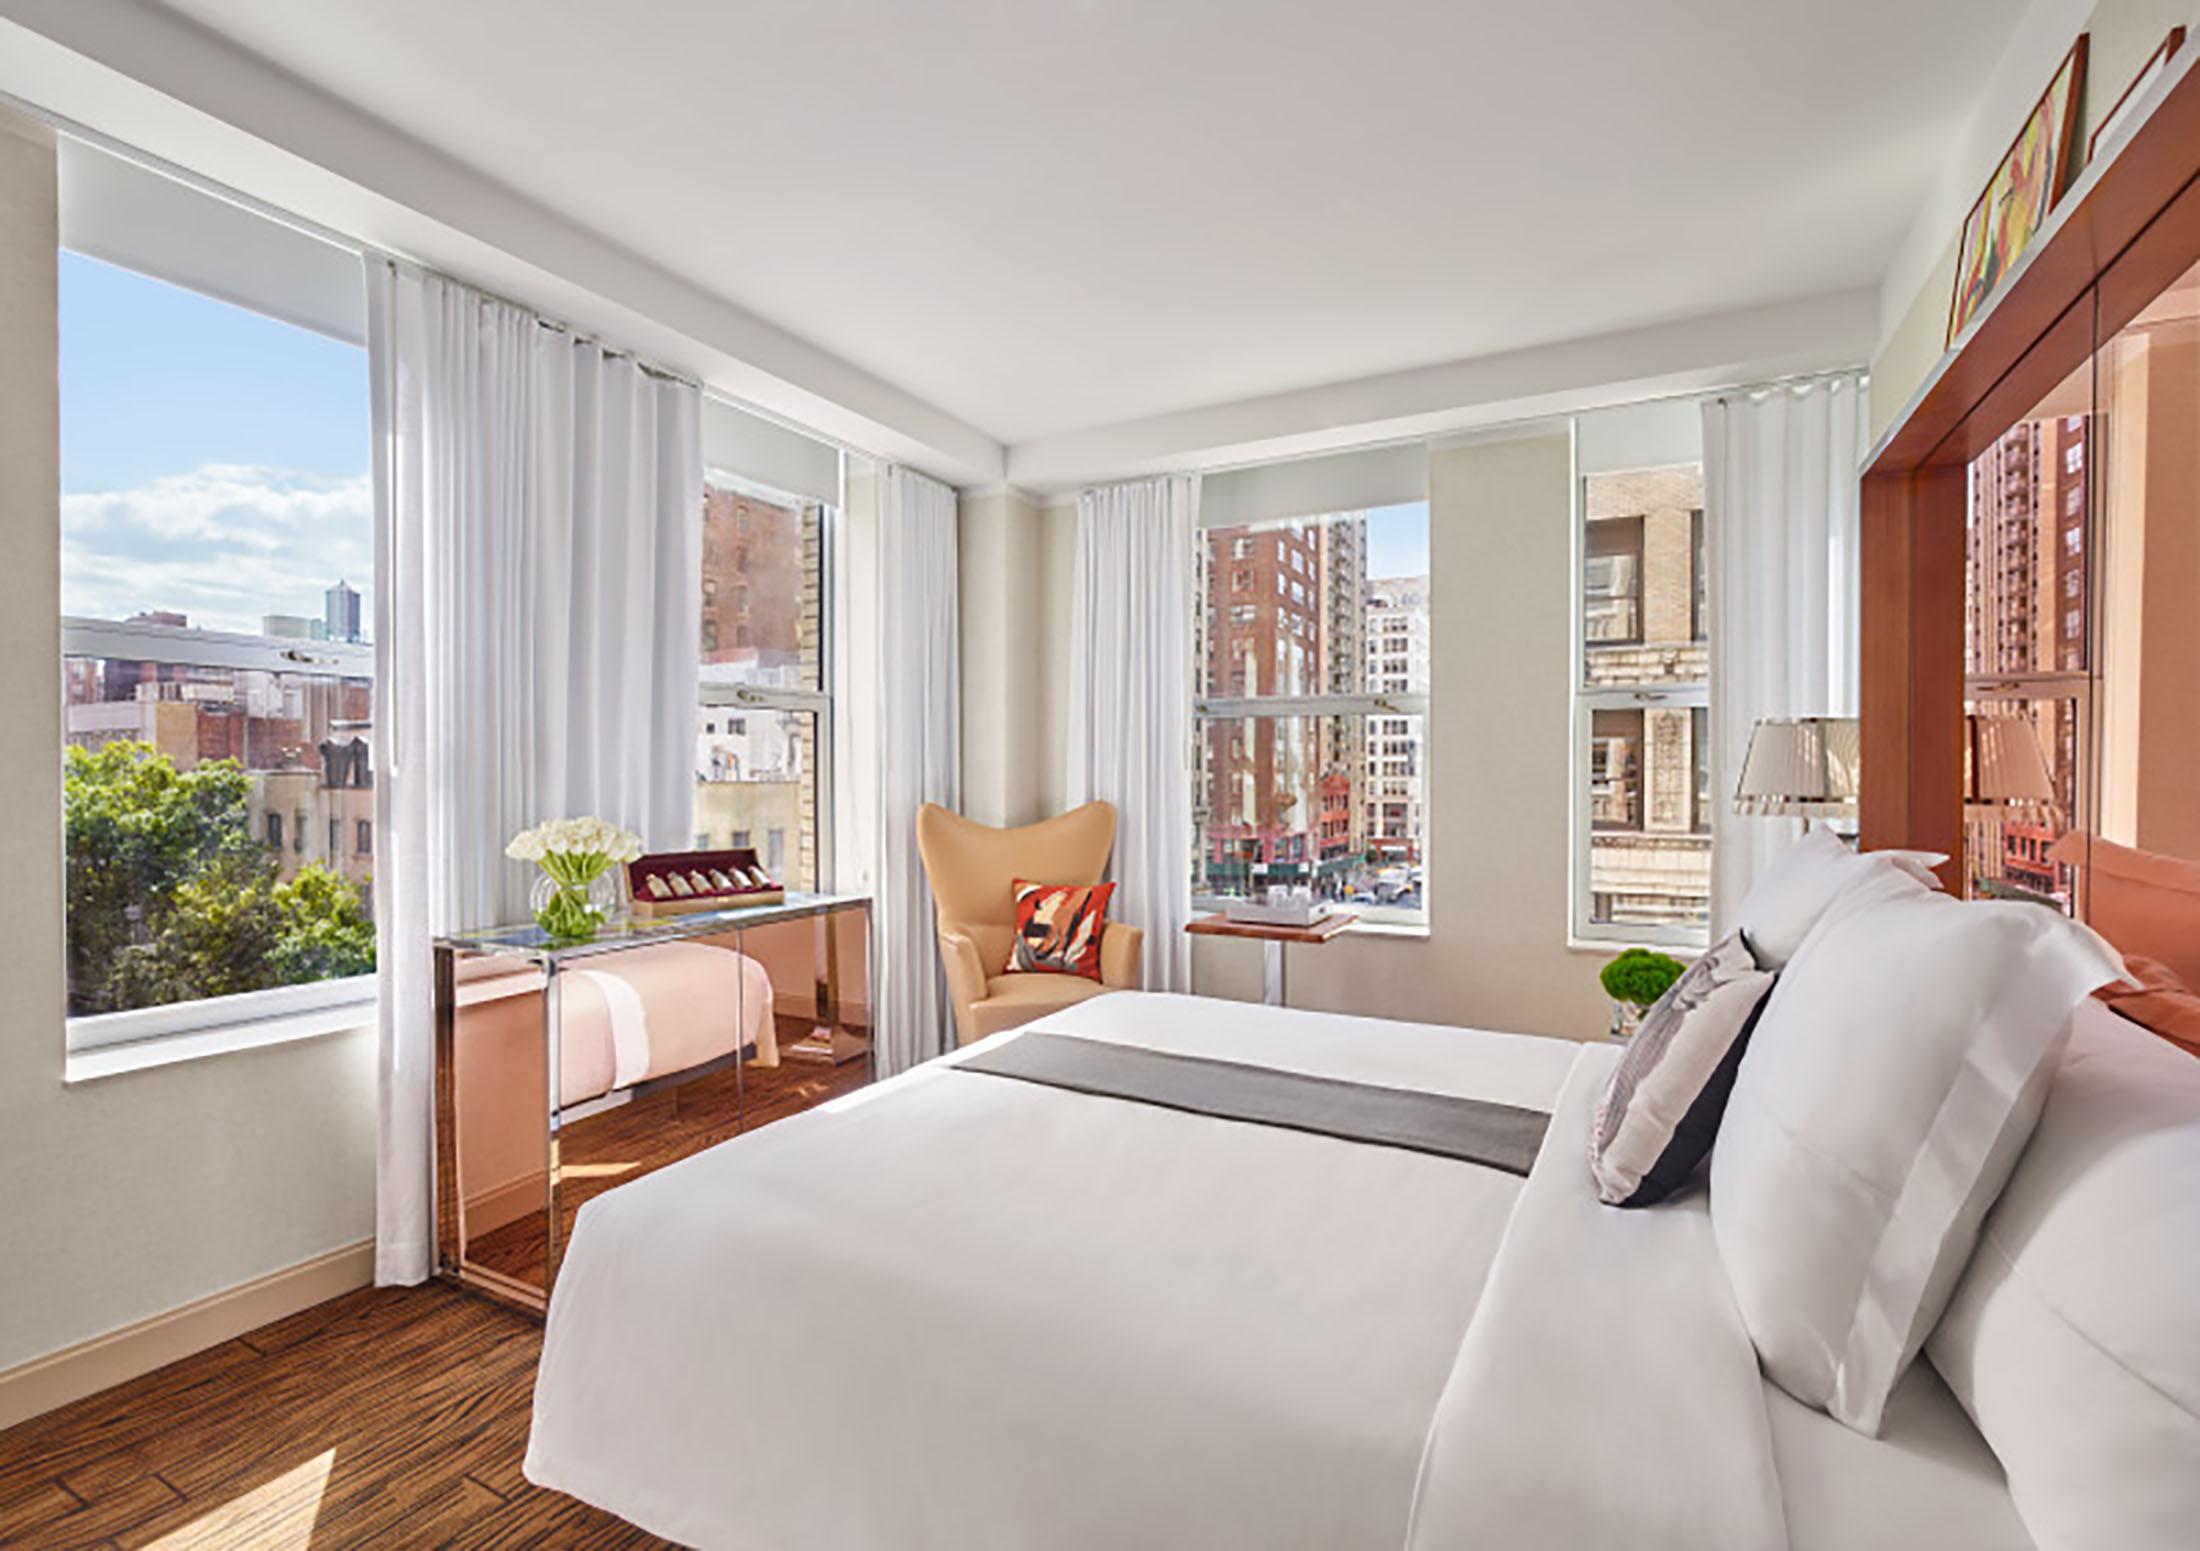 A bright hotel room overlooking the city